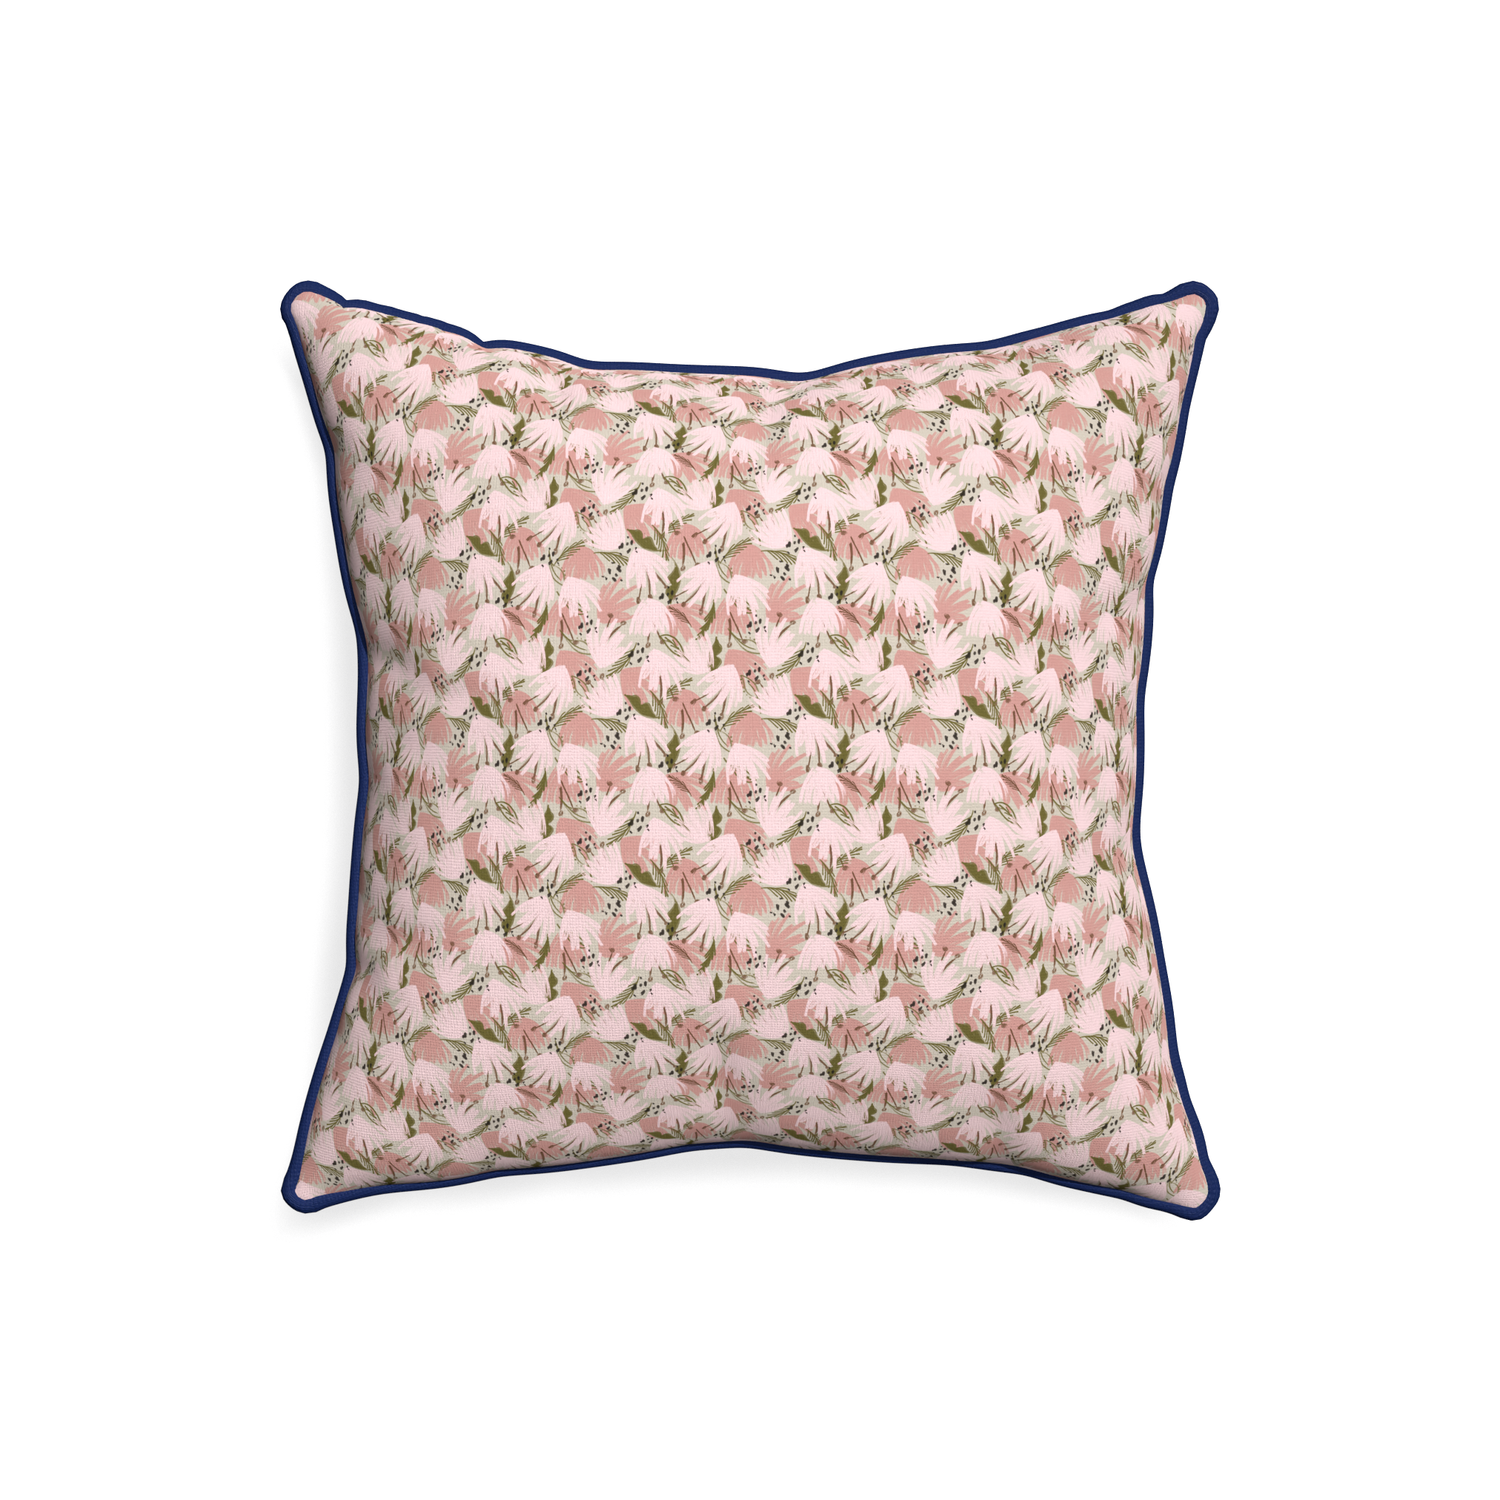 20-square eden pink custom pink floralpillow with midnight piping on white background